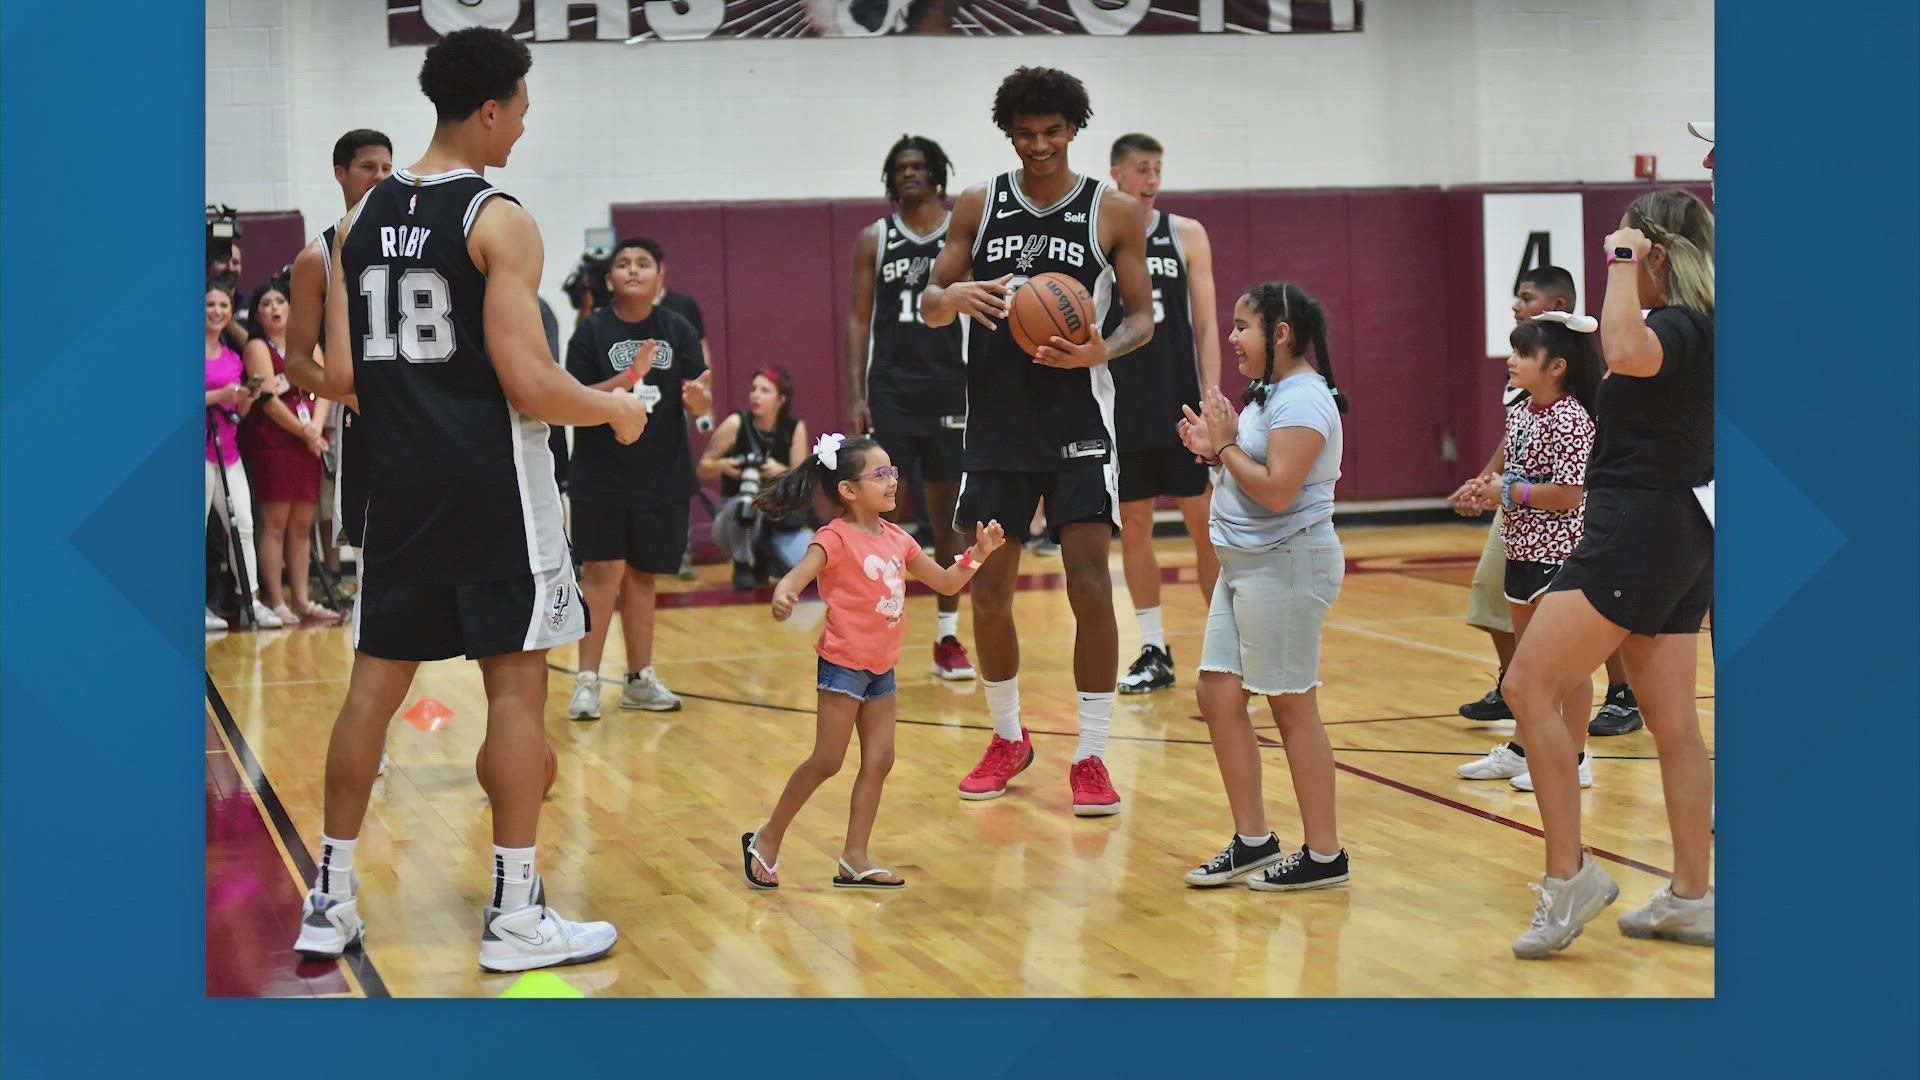 The Spurs bring a moment of celebration to fans in Uvalde, Texas ahead of start of regular-season.